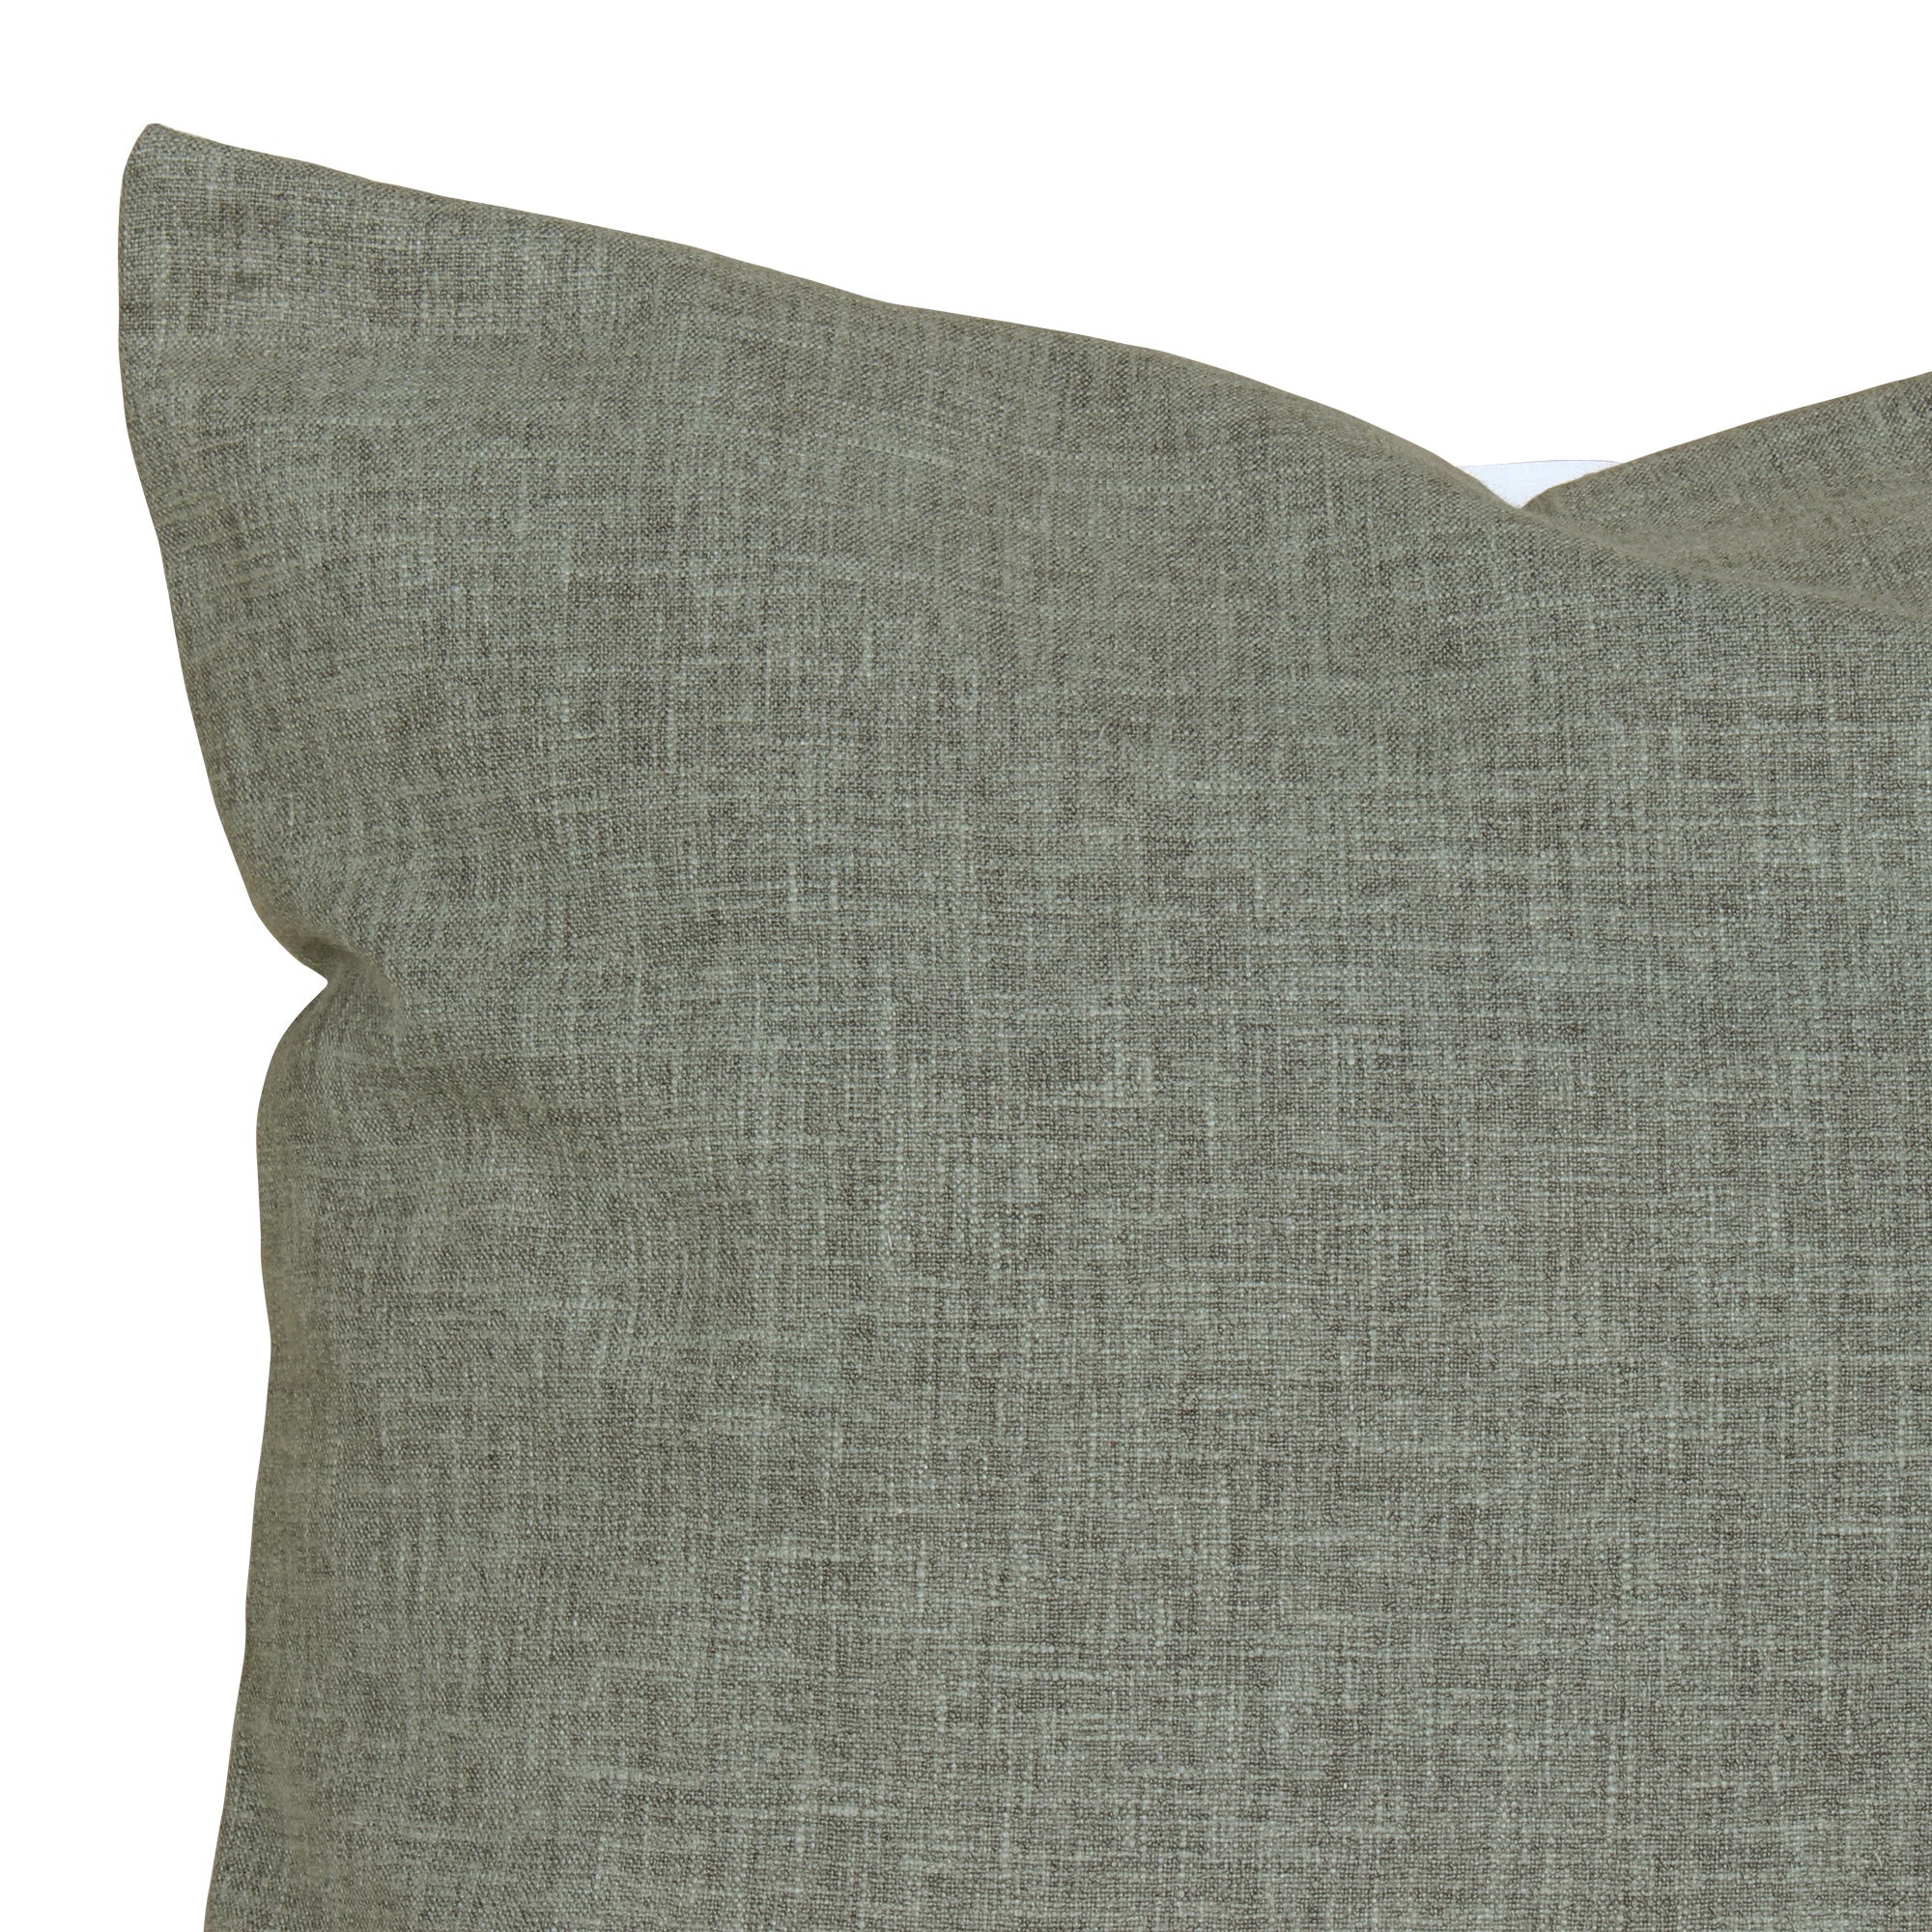 Story@Home Grey Heather Polyester 6 pcs of Alegra Cushion Covers